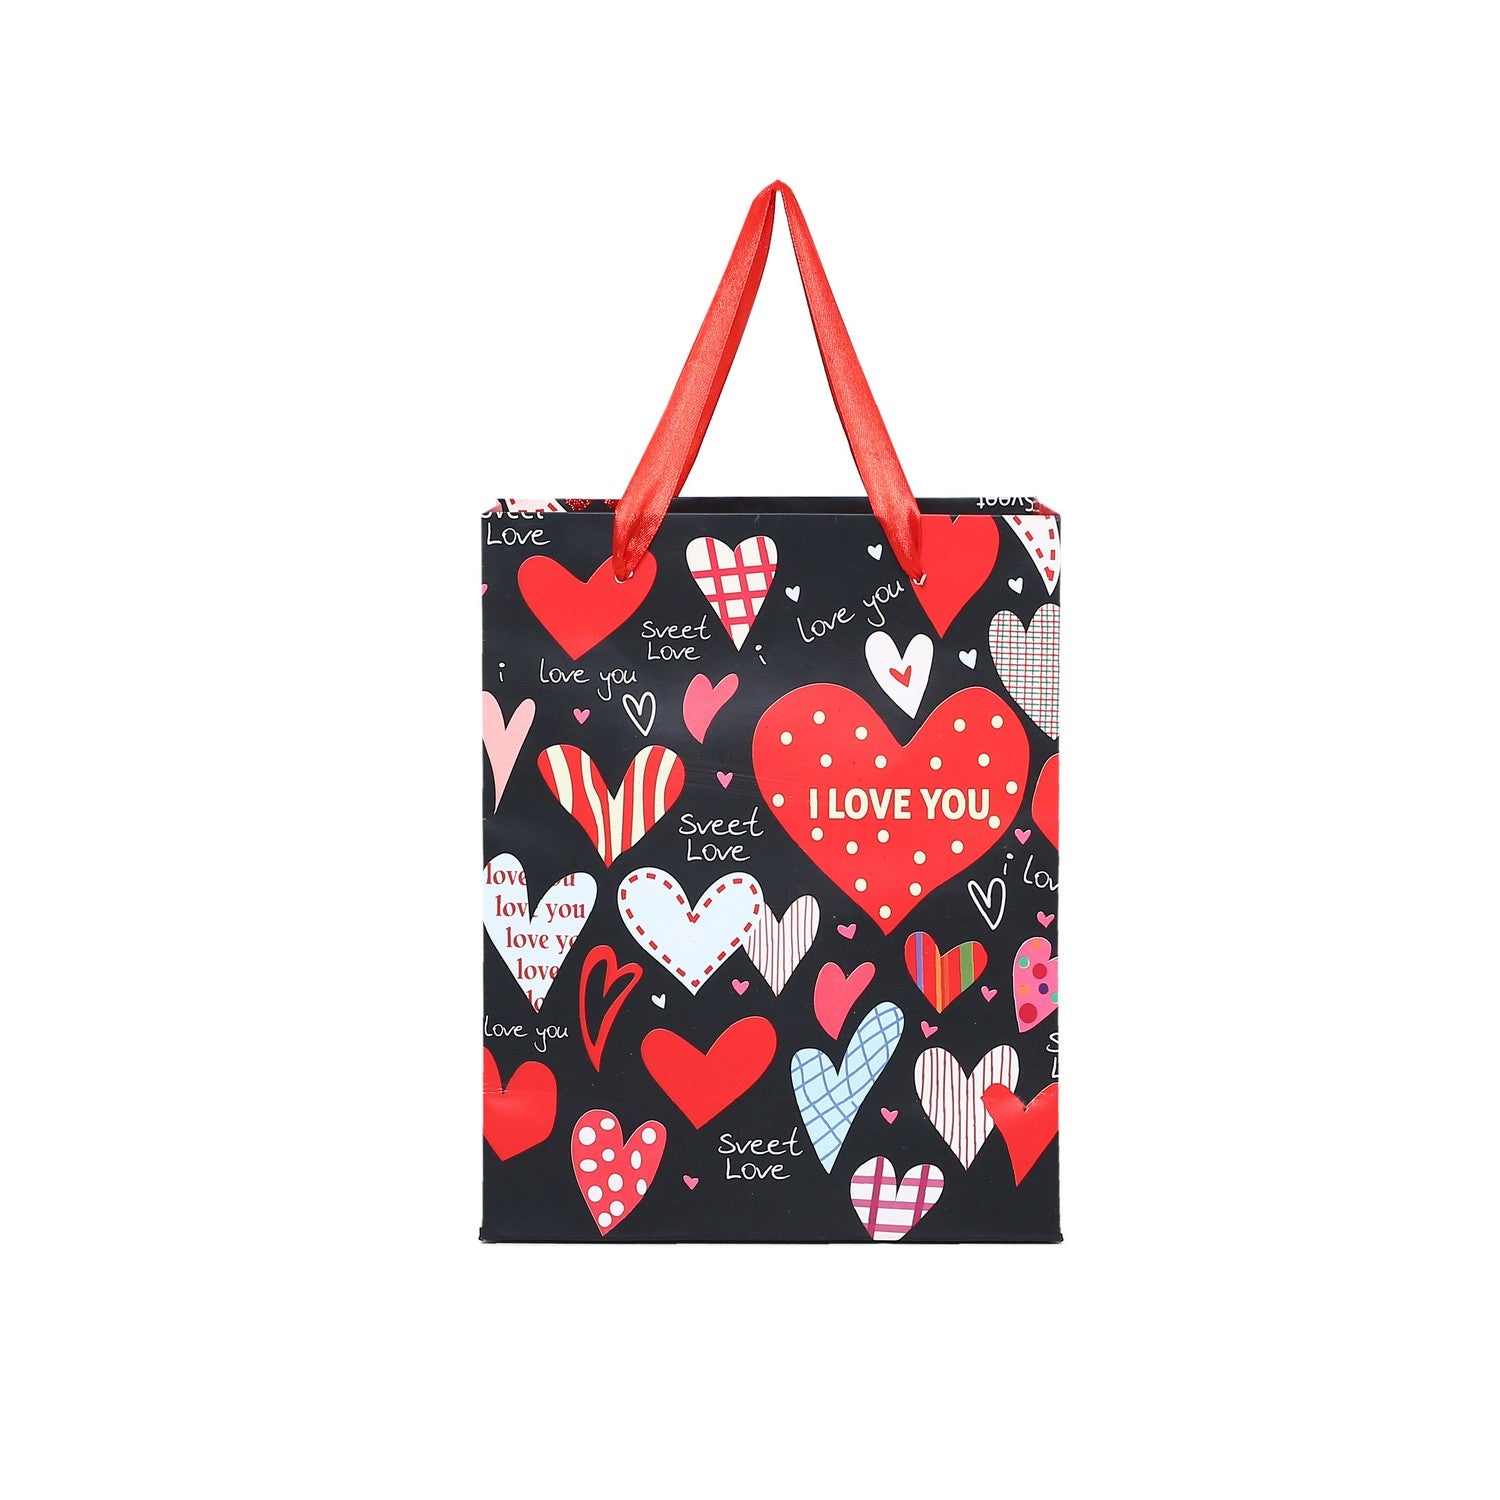 SHUBAN Valentine's Day hearts shape Paper Bag for Gifting, Valentine's Presents, birthday gifts (23 X 18 X 9 CM ) - Set of 5 | Book Bargain Buy